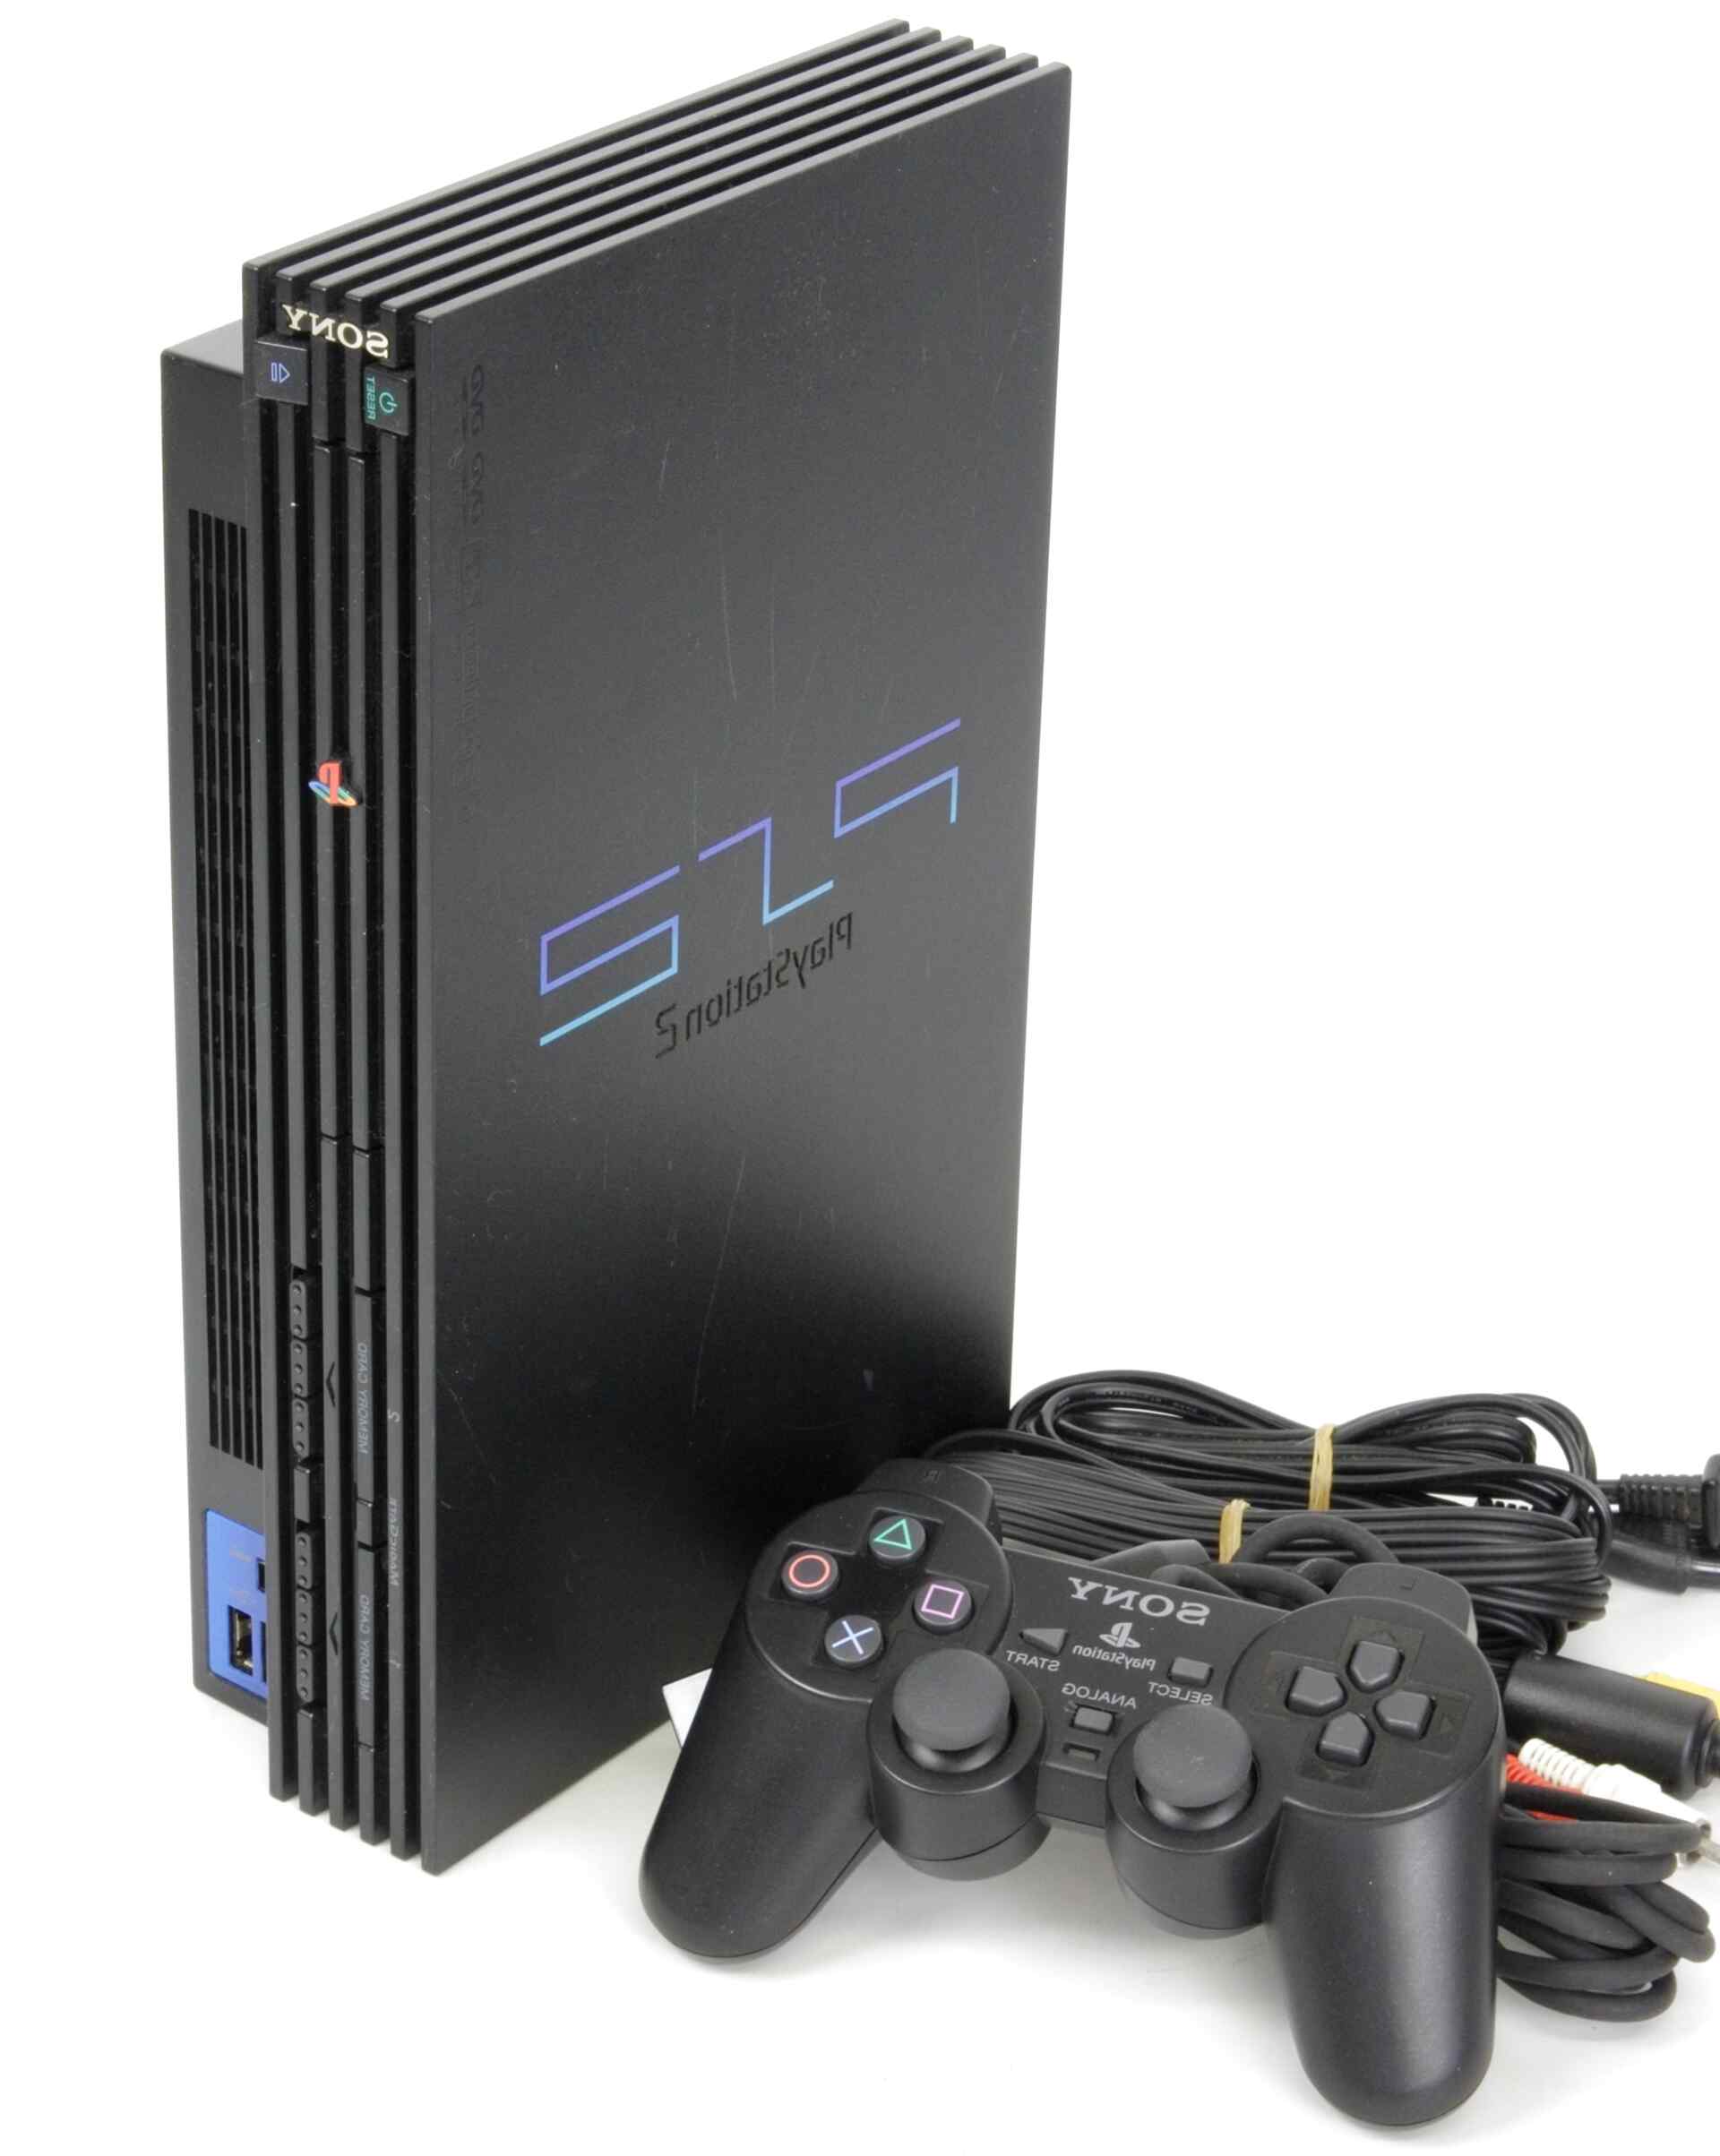 ps2 consoles sold